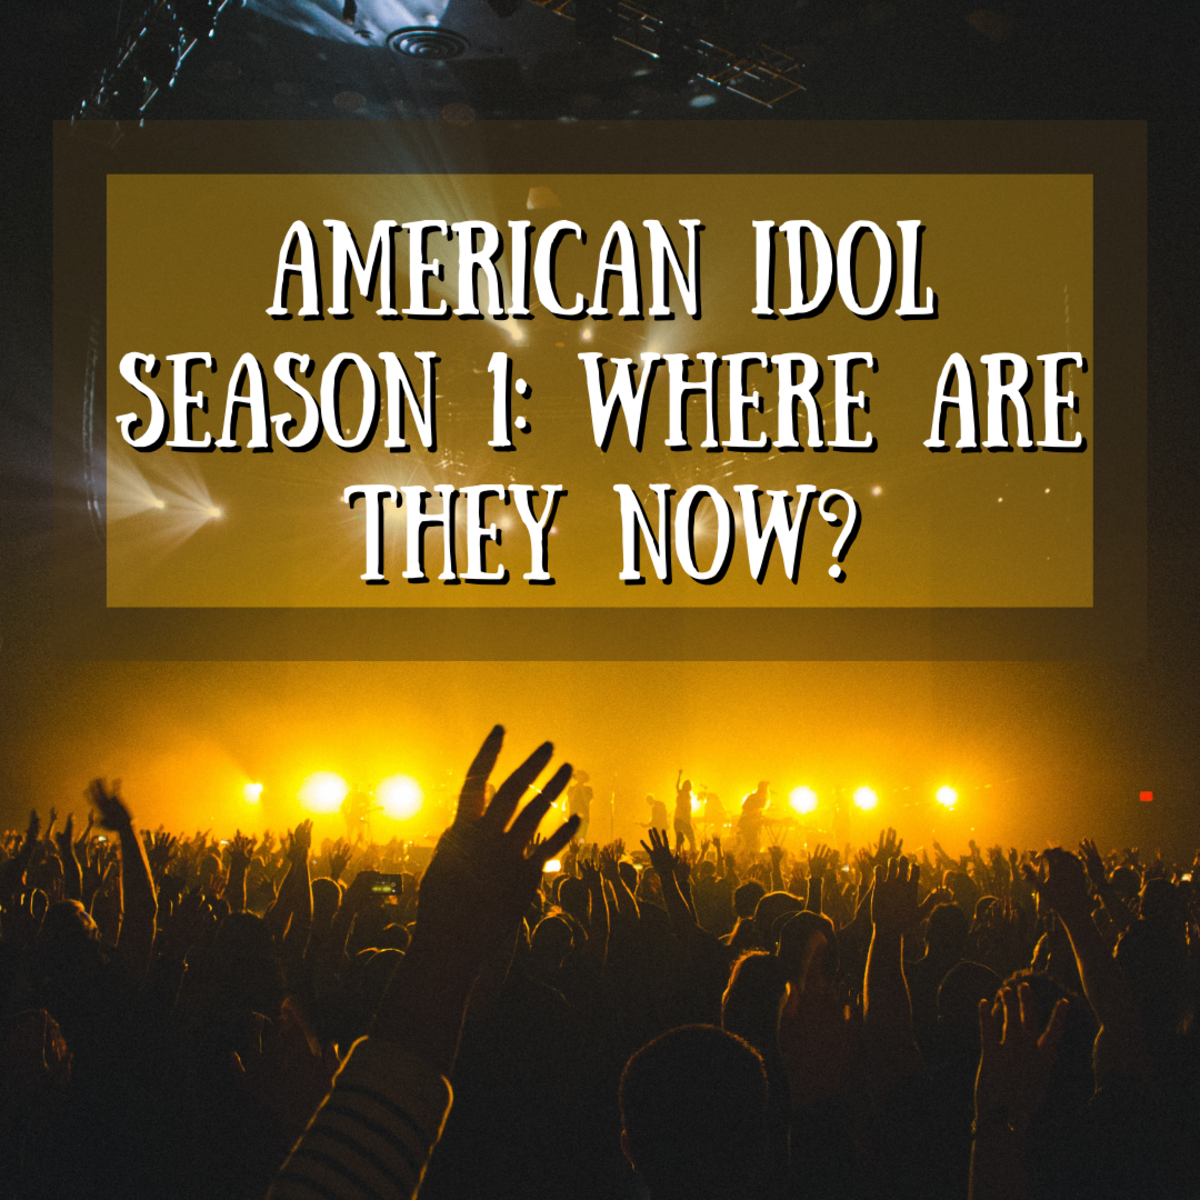 This article takes a look at the contestants from Season 1 of American Idol. Where are they all now?